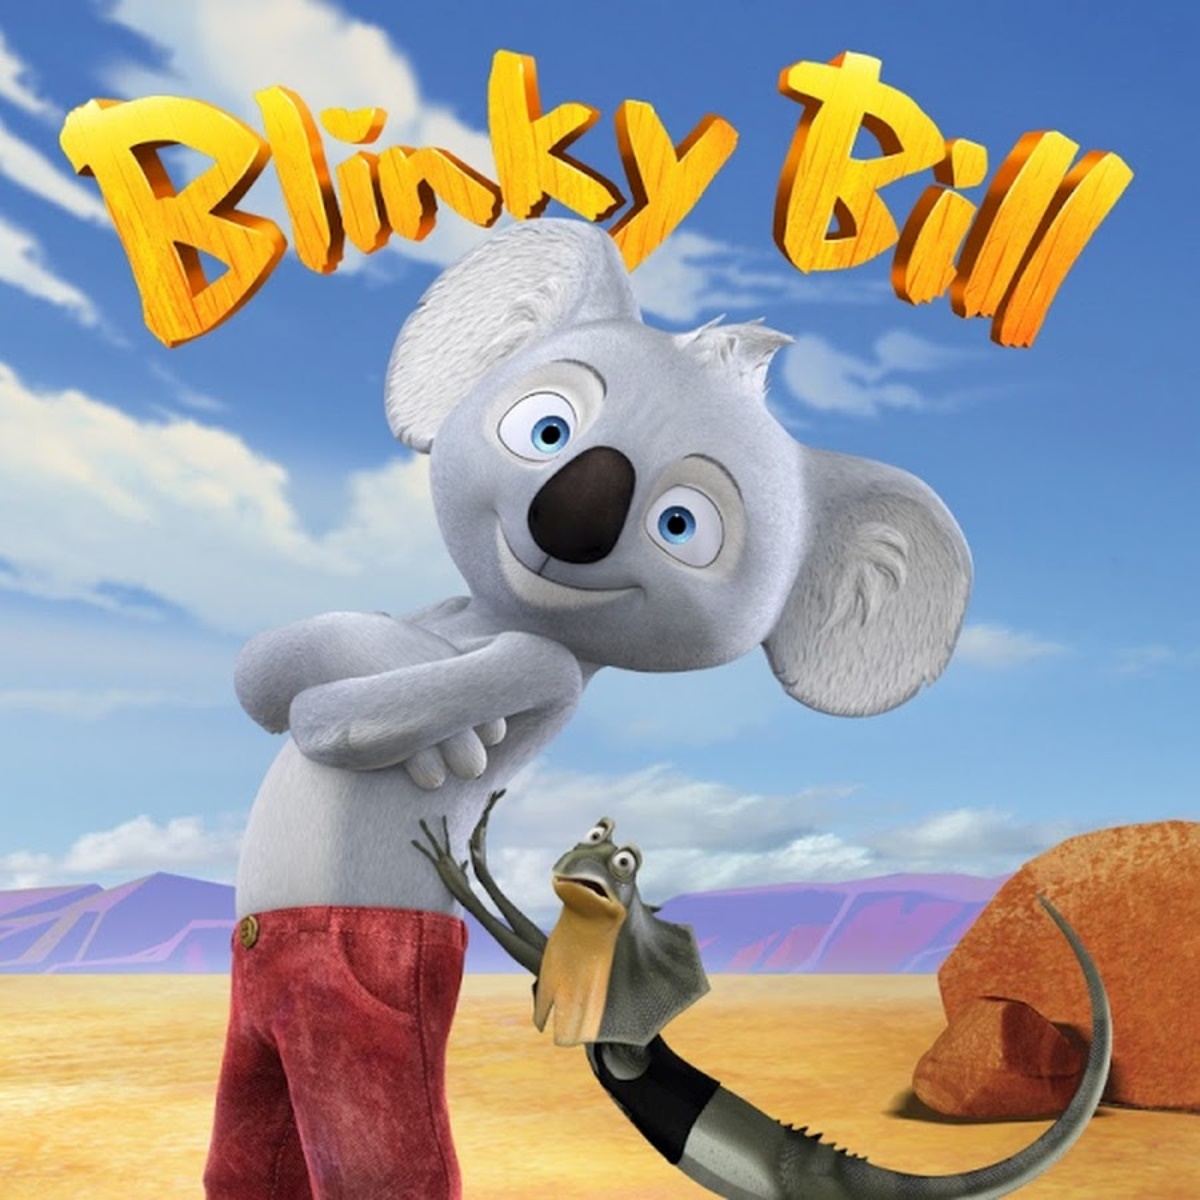 13-facts-about-blinky-bill-the-adventures-of-blinky-bill